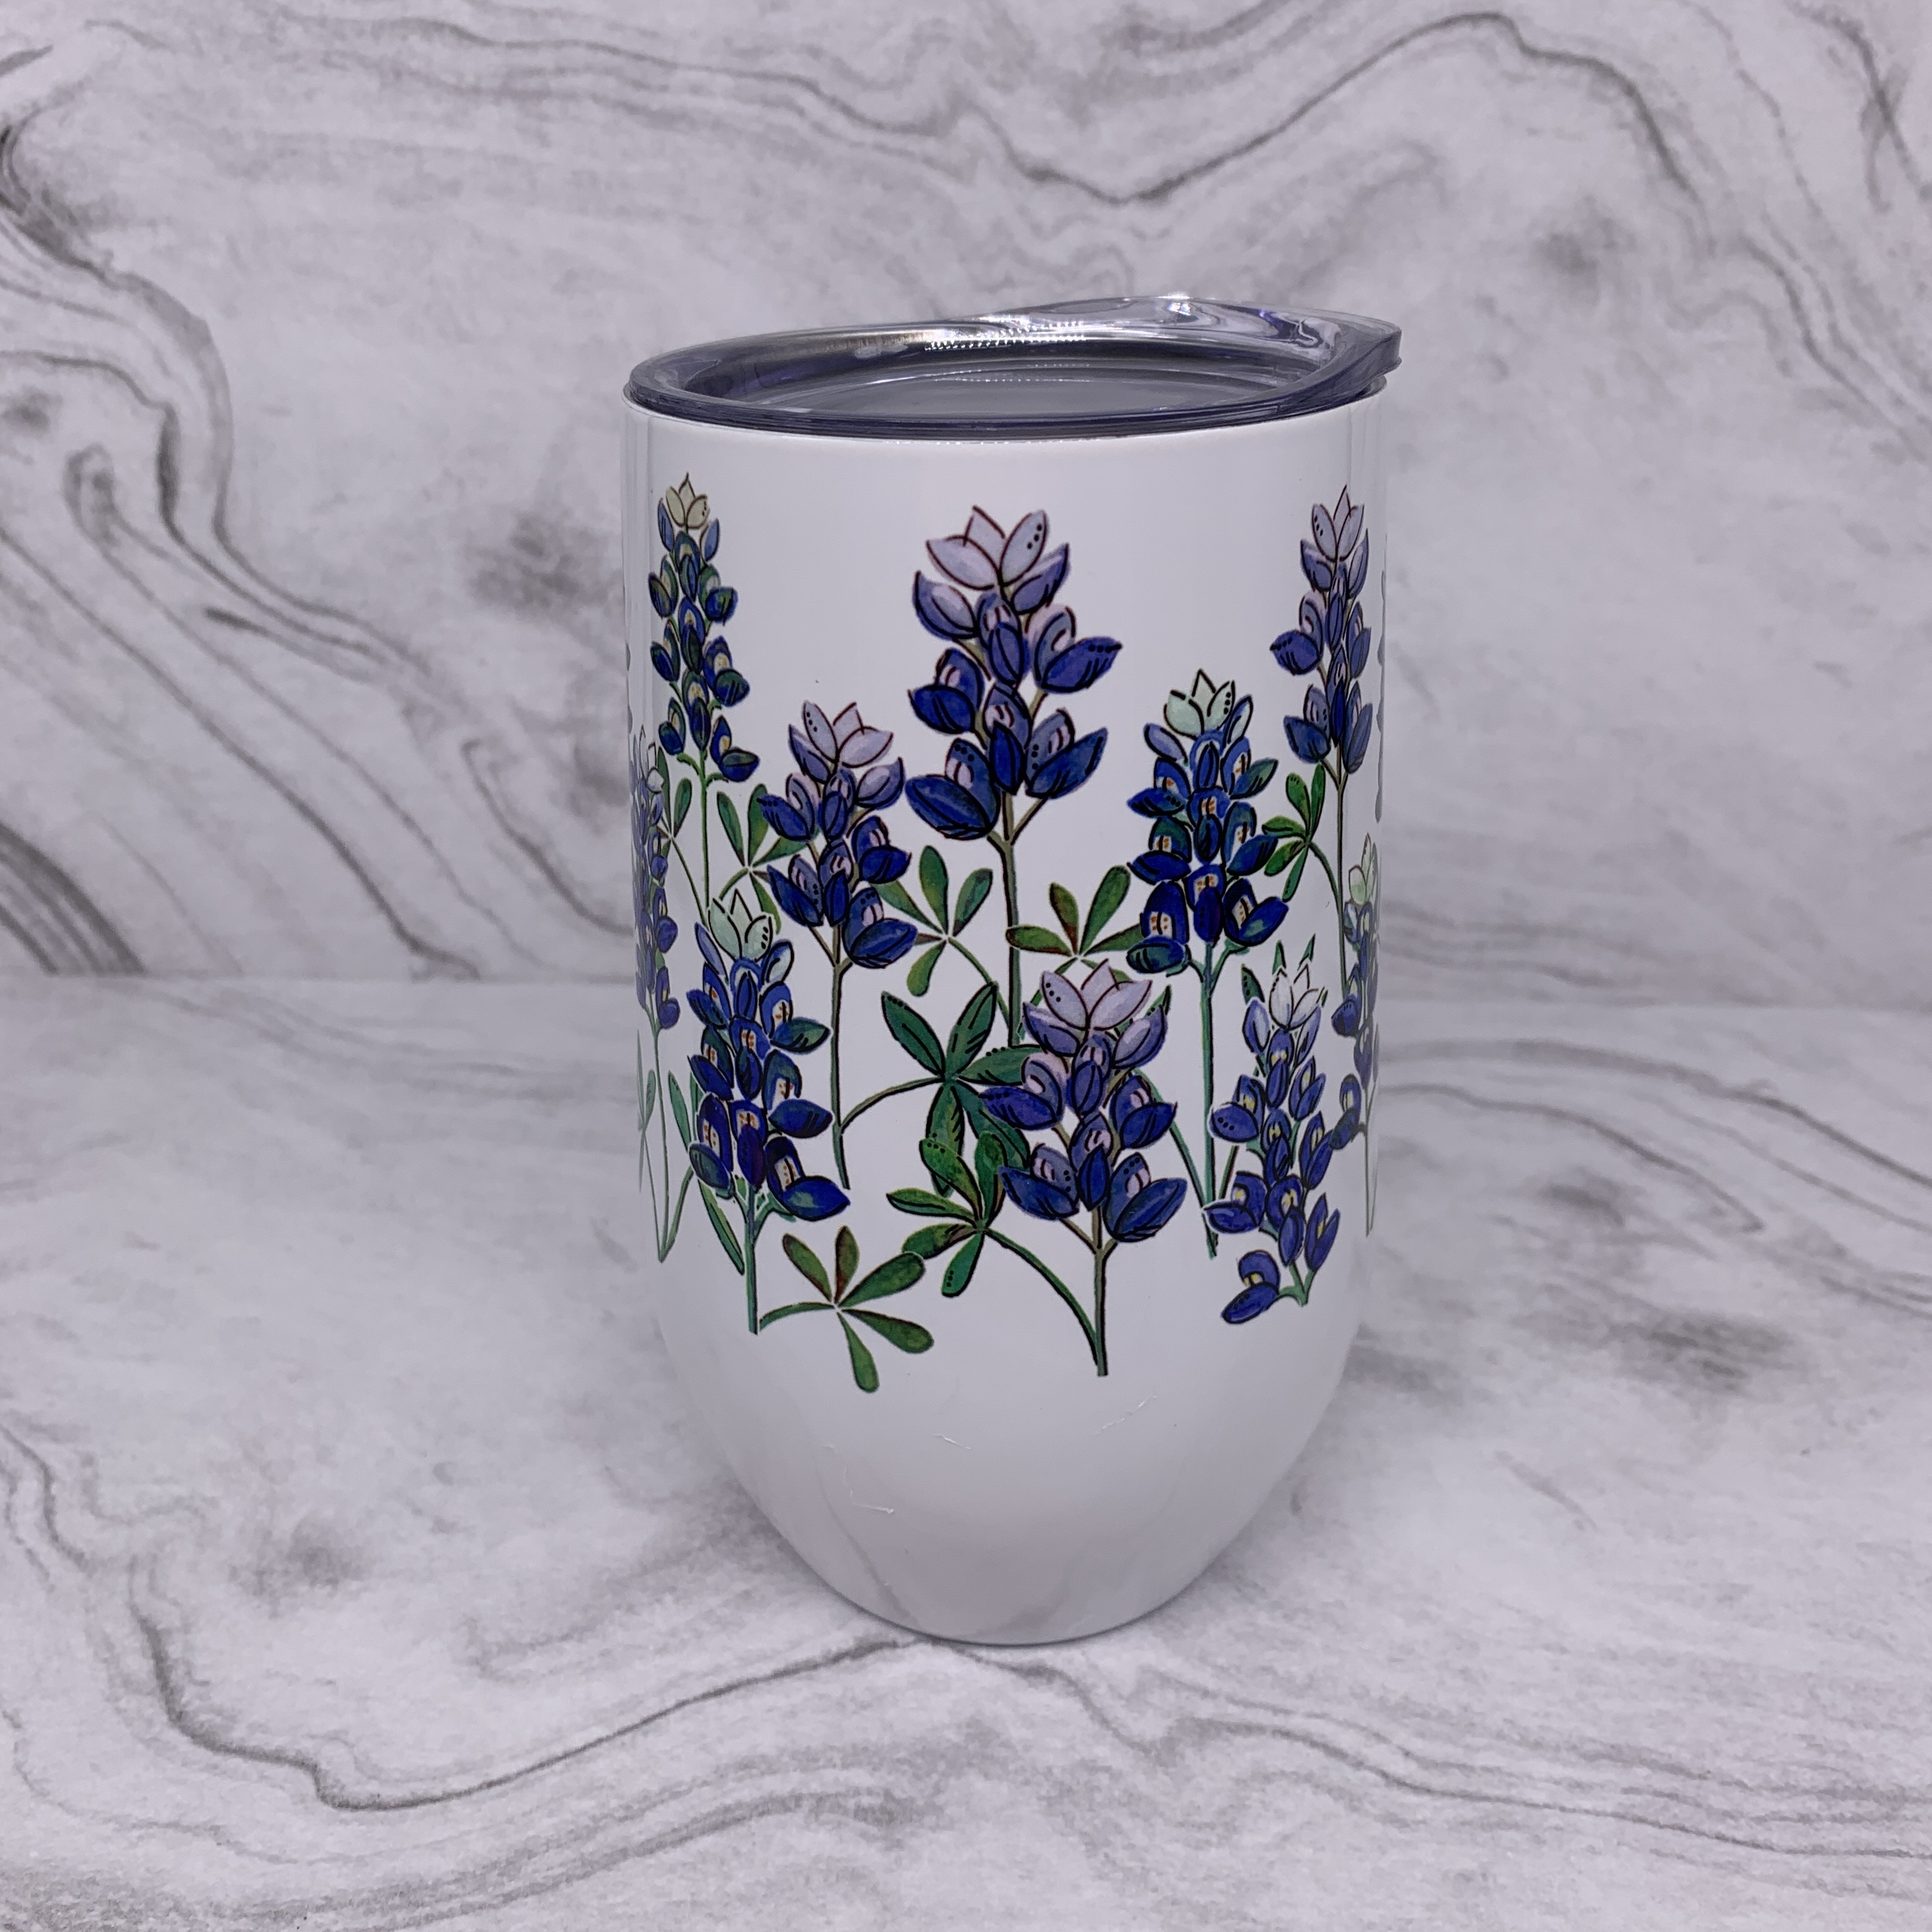 My original design featuring the Texas state flower, the bluebonnets. 